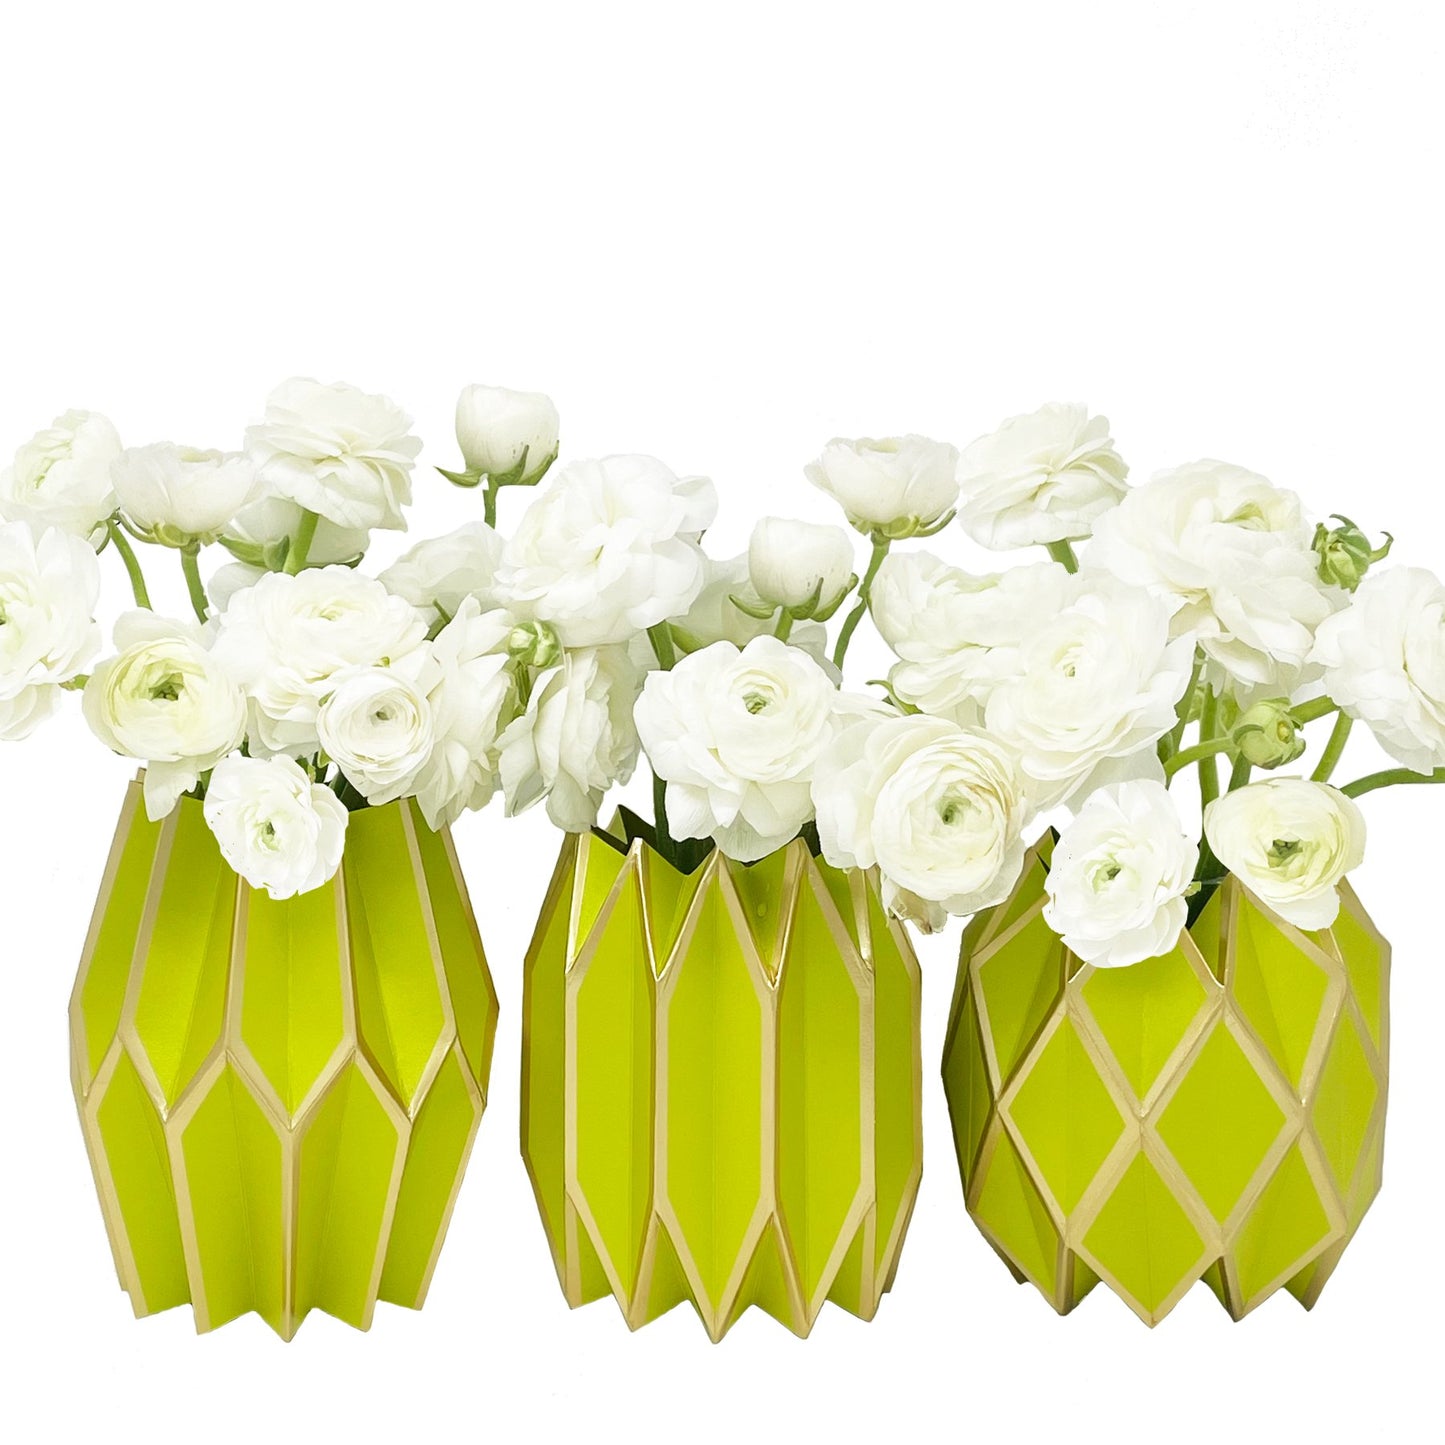 Chartreuse paper sleeve vases featuring gold accents with white flowers